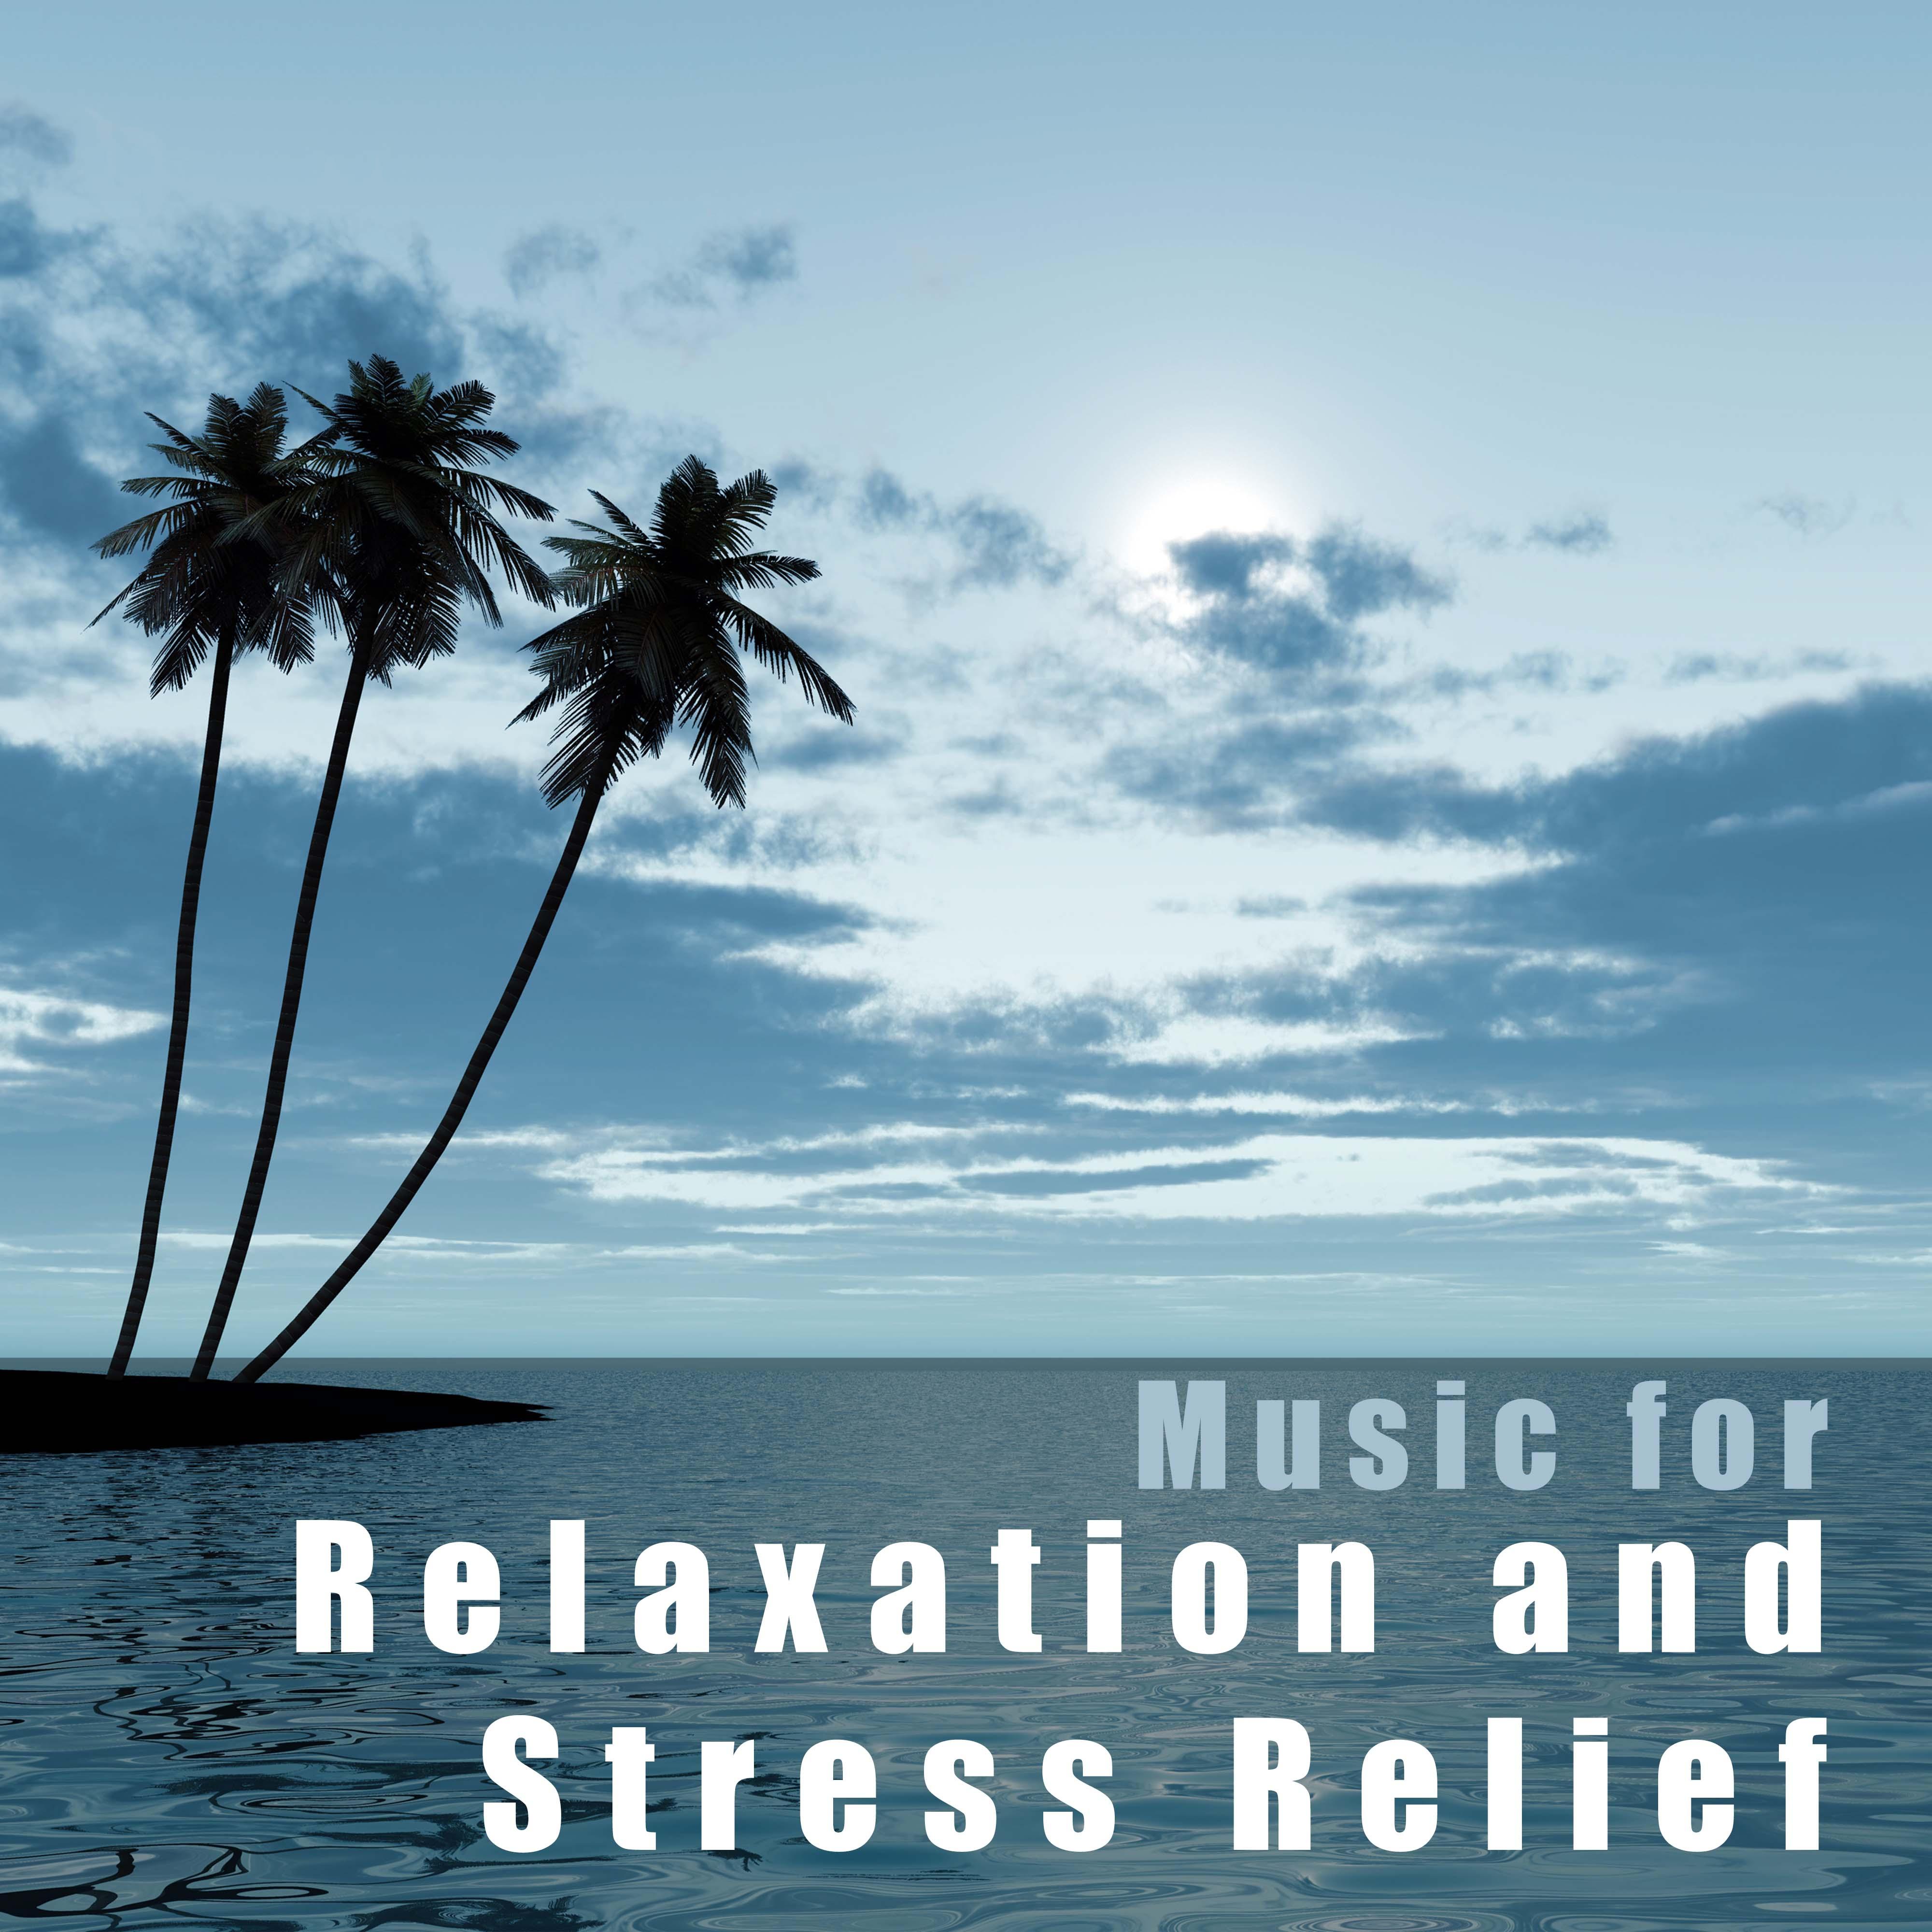 Music for Relaxation and Stress Relief